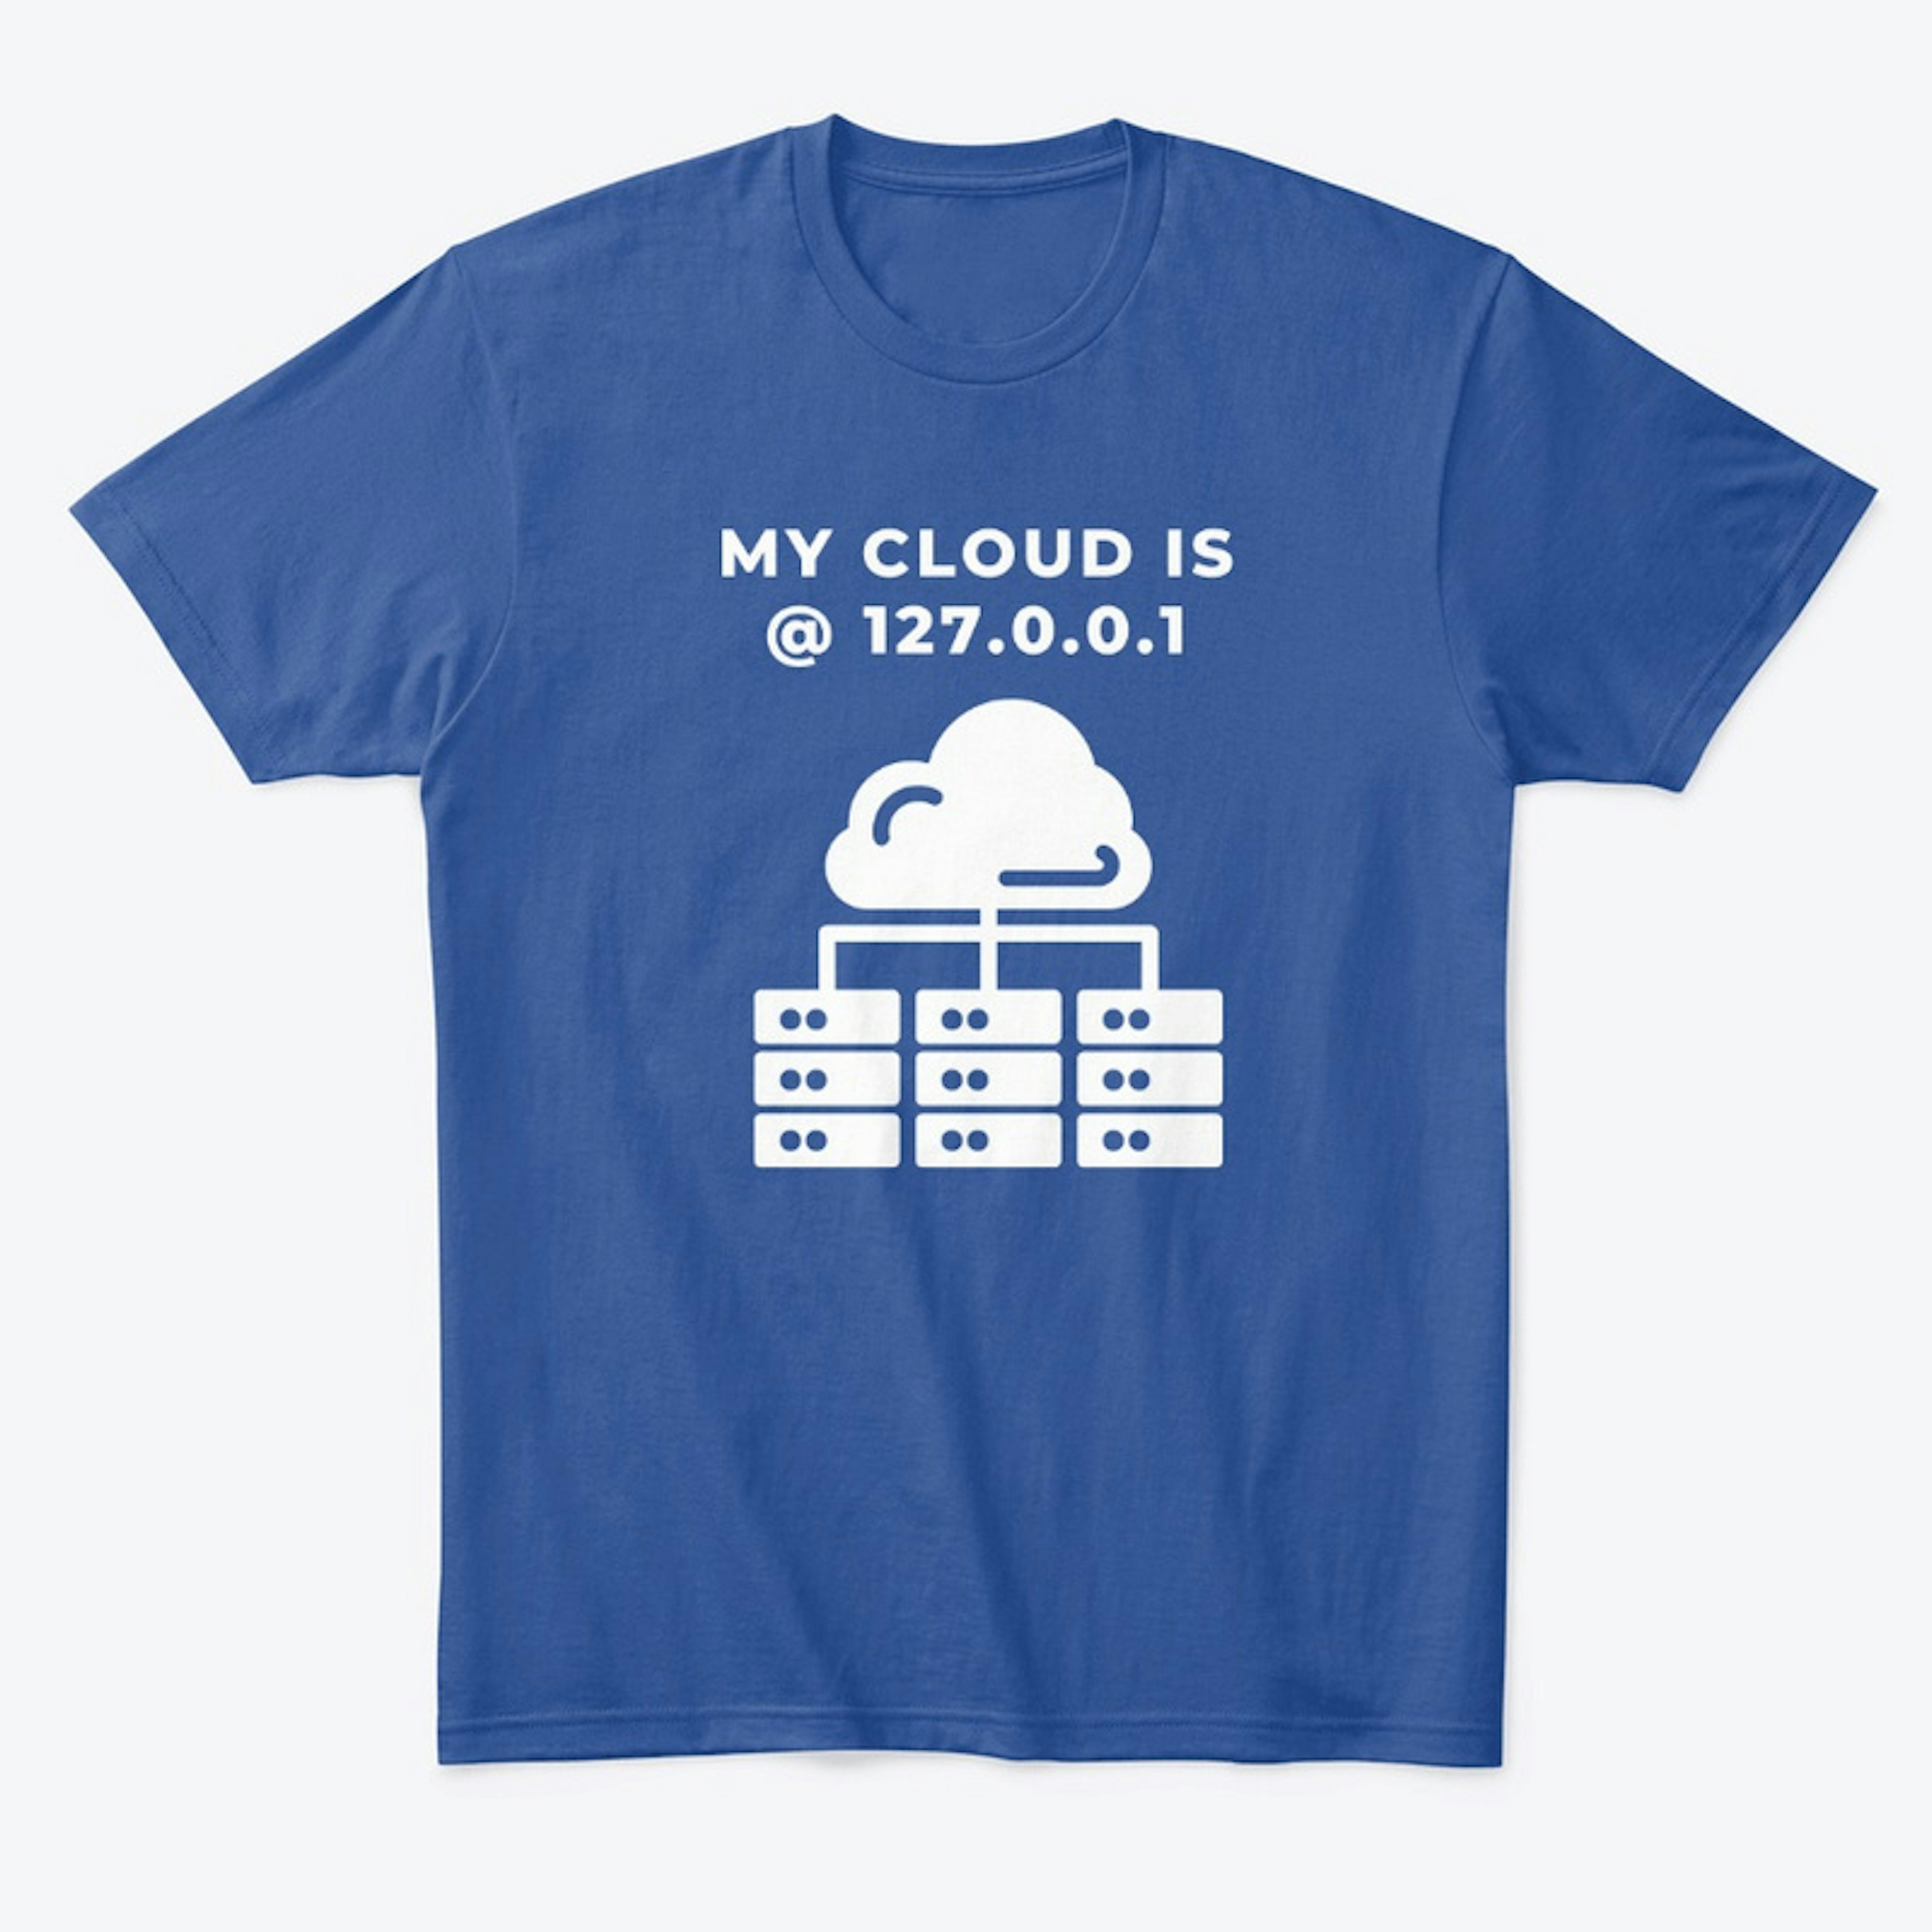 My Cloud is at 127.0.0.1